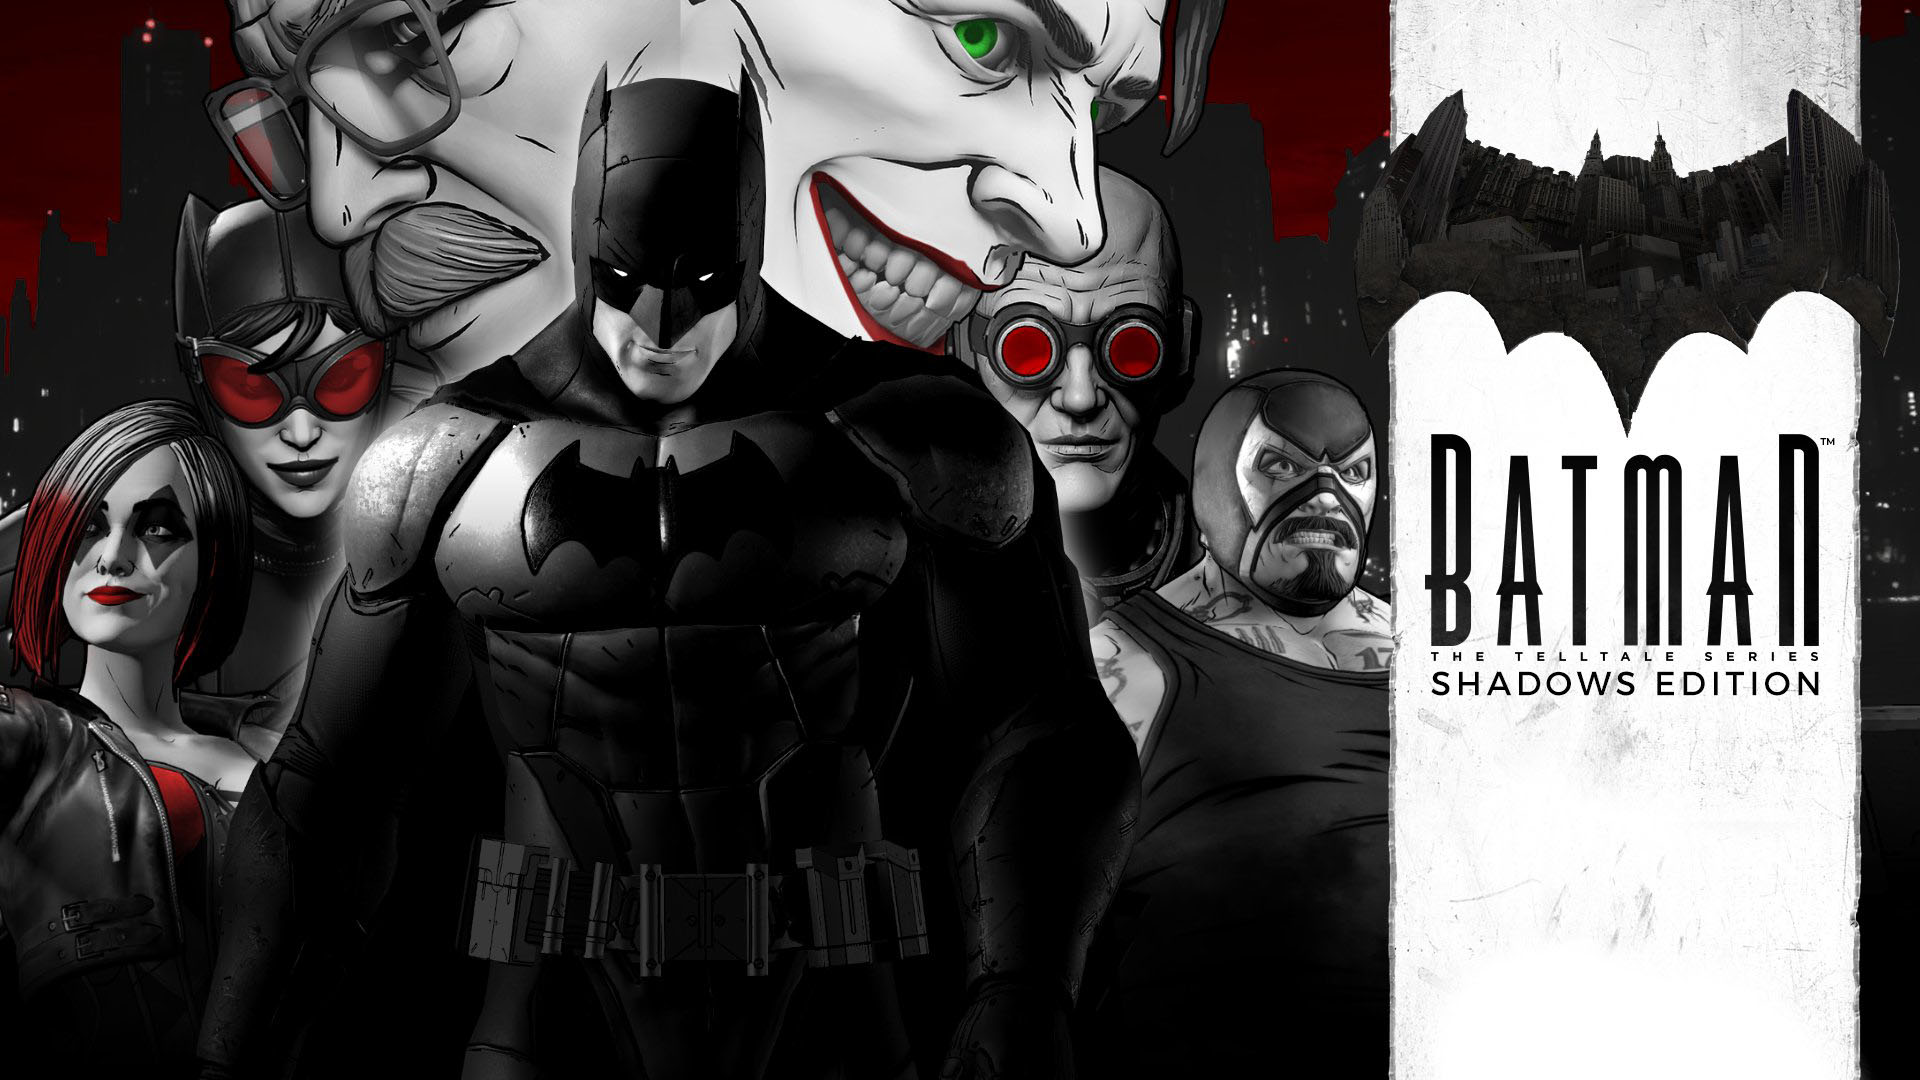 The Telltale Batman Shadows Edition is Available Now on Xbox One - Xbox Wire